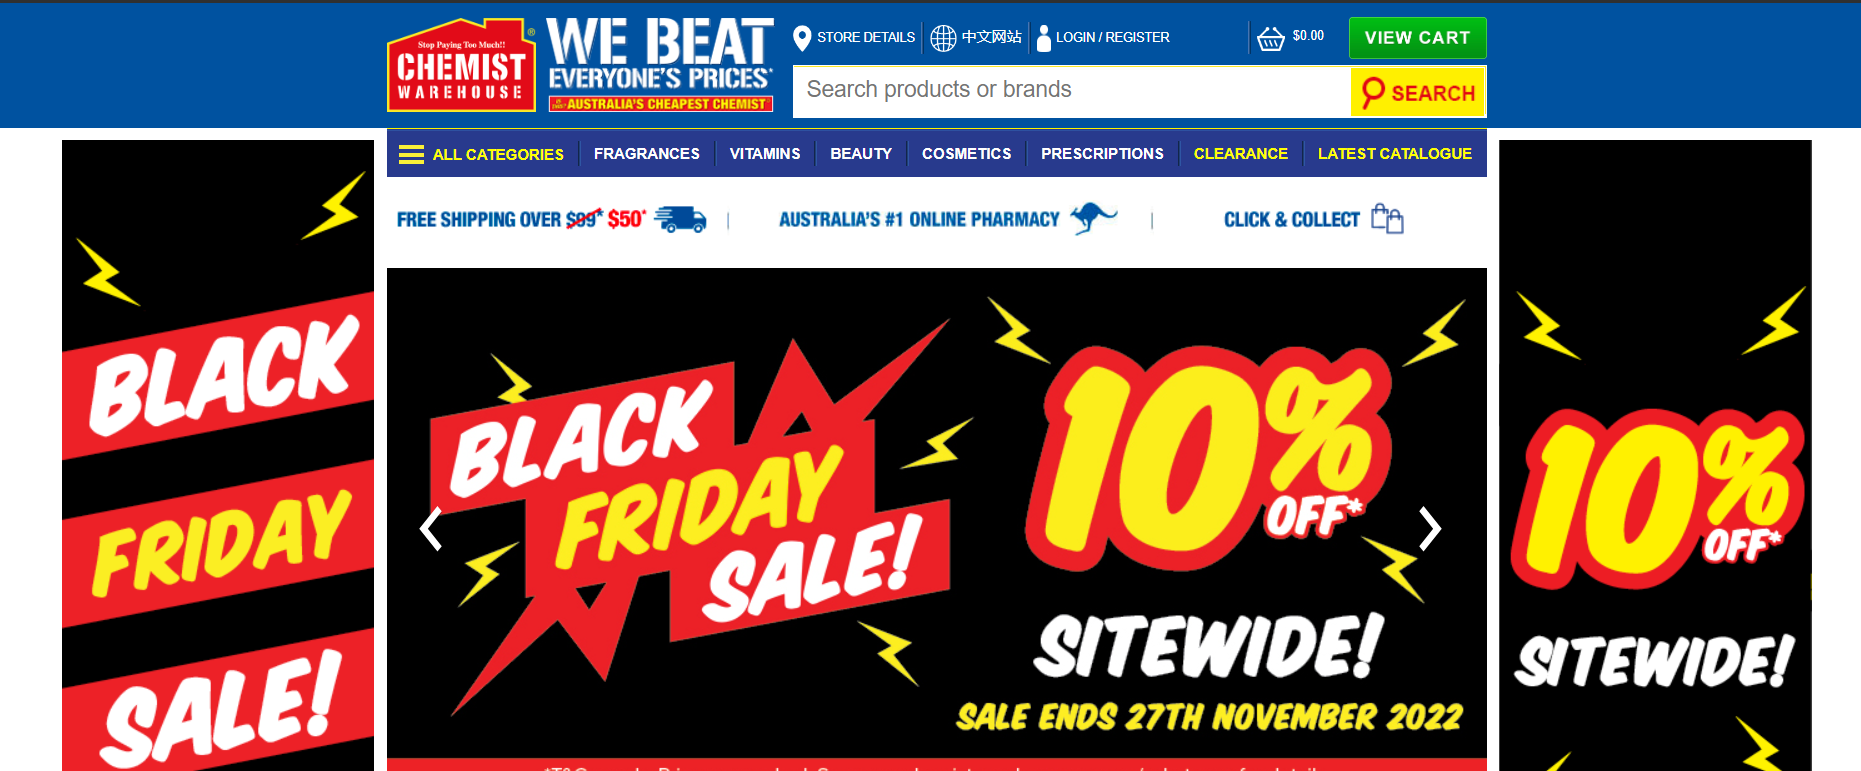 Chemist Warehouse Black Friday sale - 10% OFF sitewide, Free shipping $50+